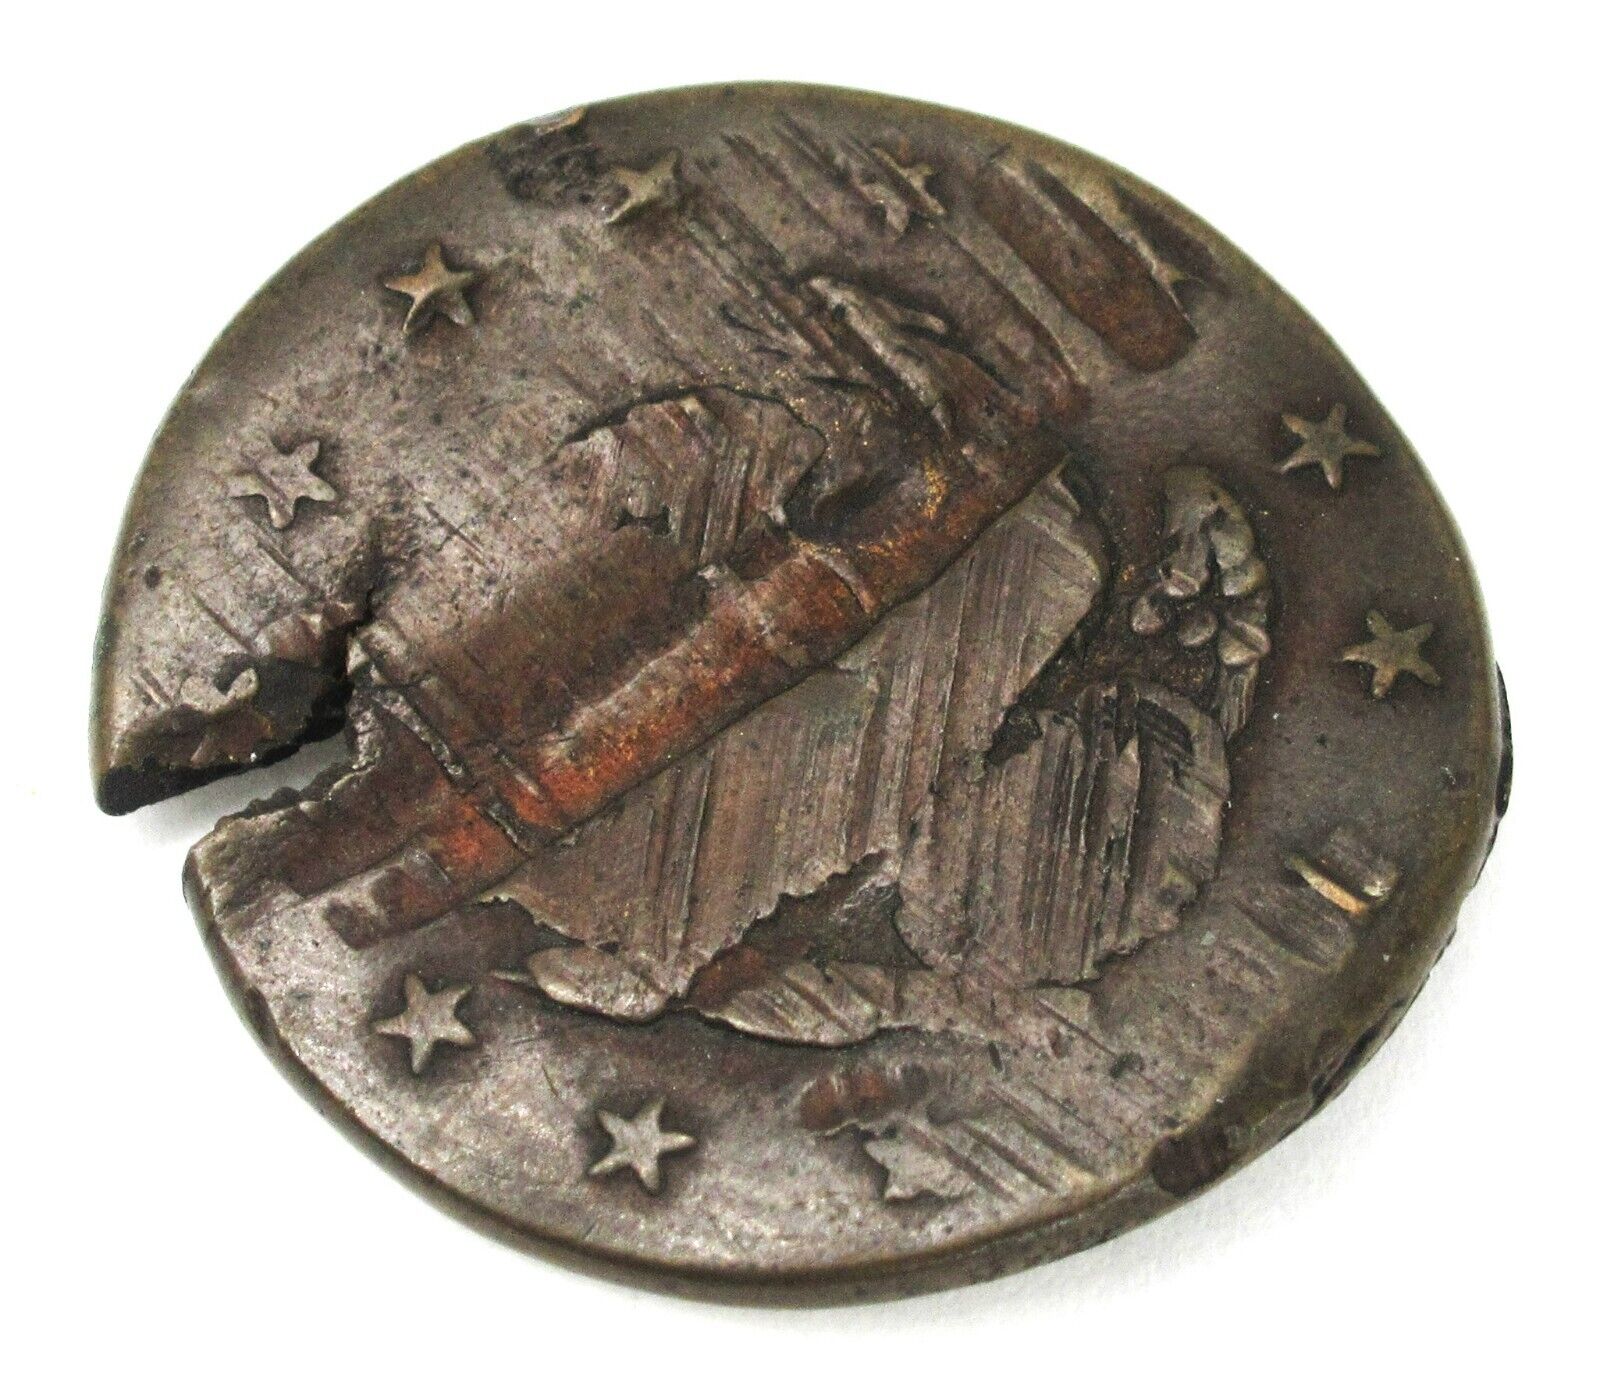 Early One-Piece US Navy Coat Button with Damage 12-13 five-pointed stars